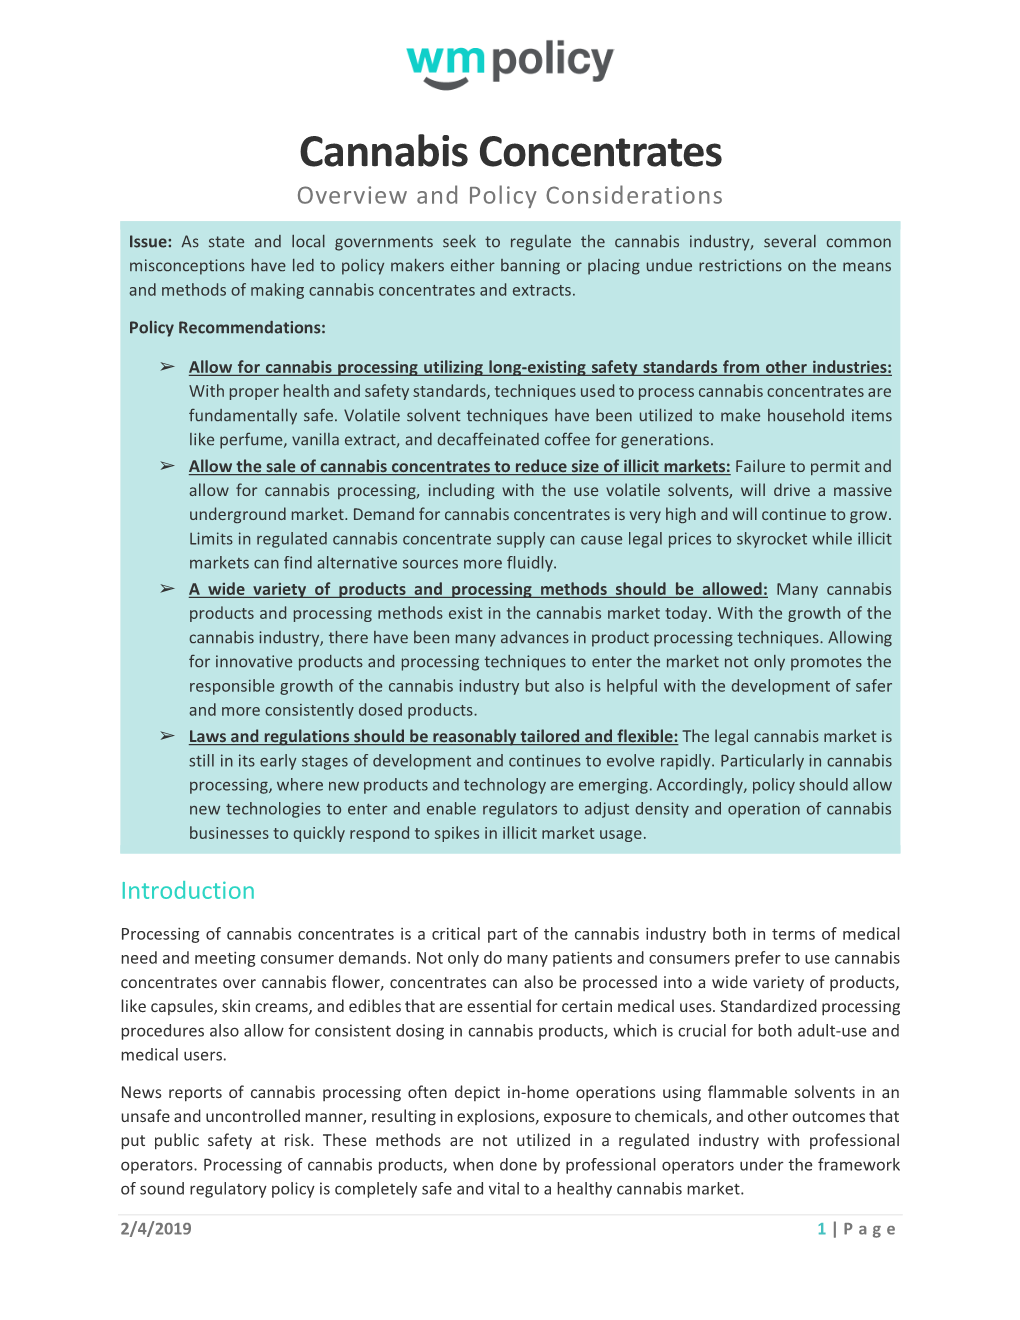 Cannabis Concentrates Overview and Policy Considerations